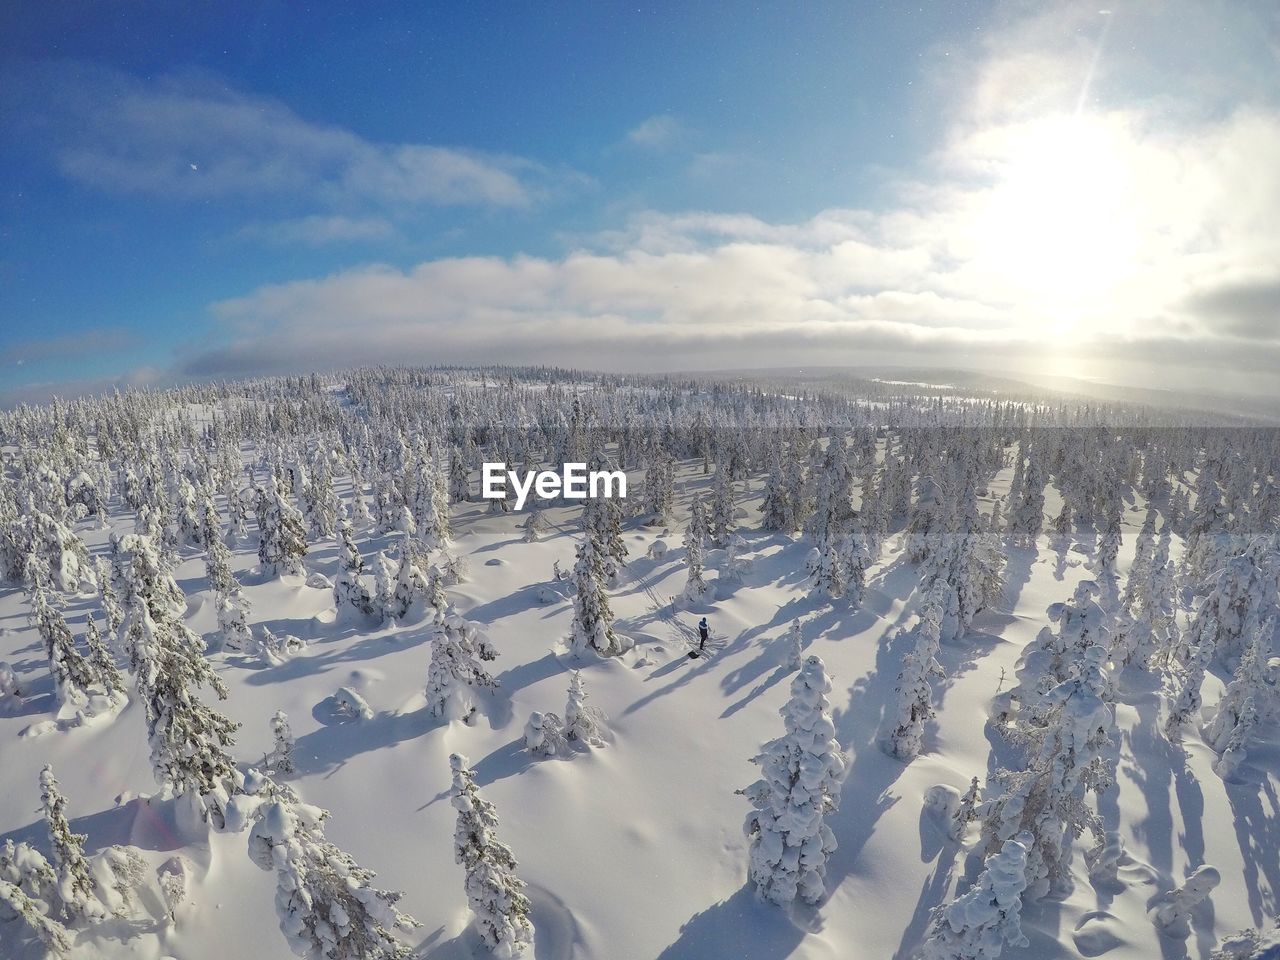 AERIAL VIEW OF SNOW COVERED TREES AGAINST SKY